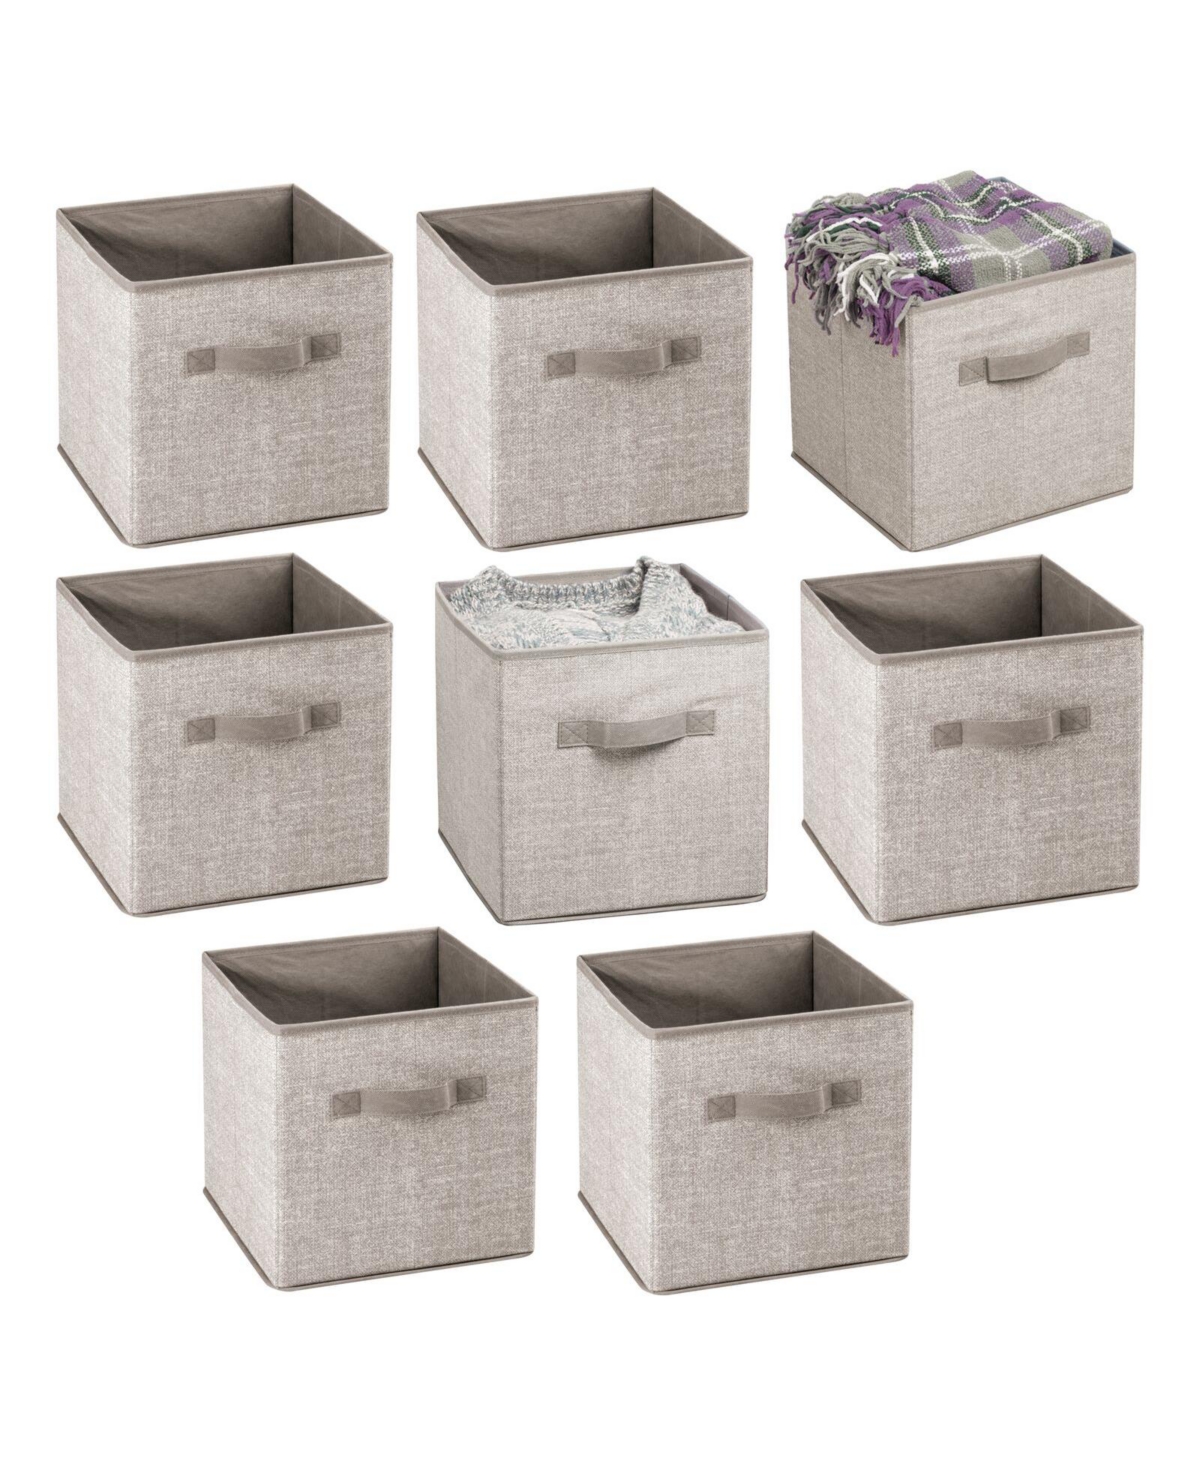 Small Fabric Closet Organizer Cube Bin with Front Handle, 8 Pack, Linen - Linen